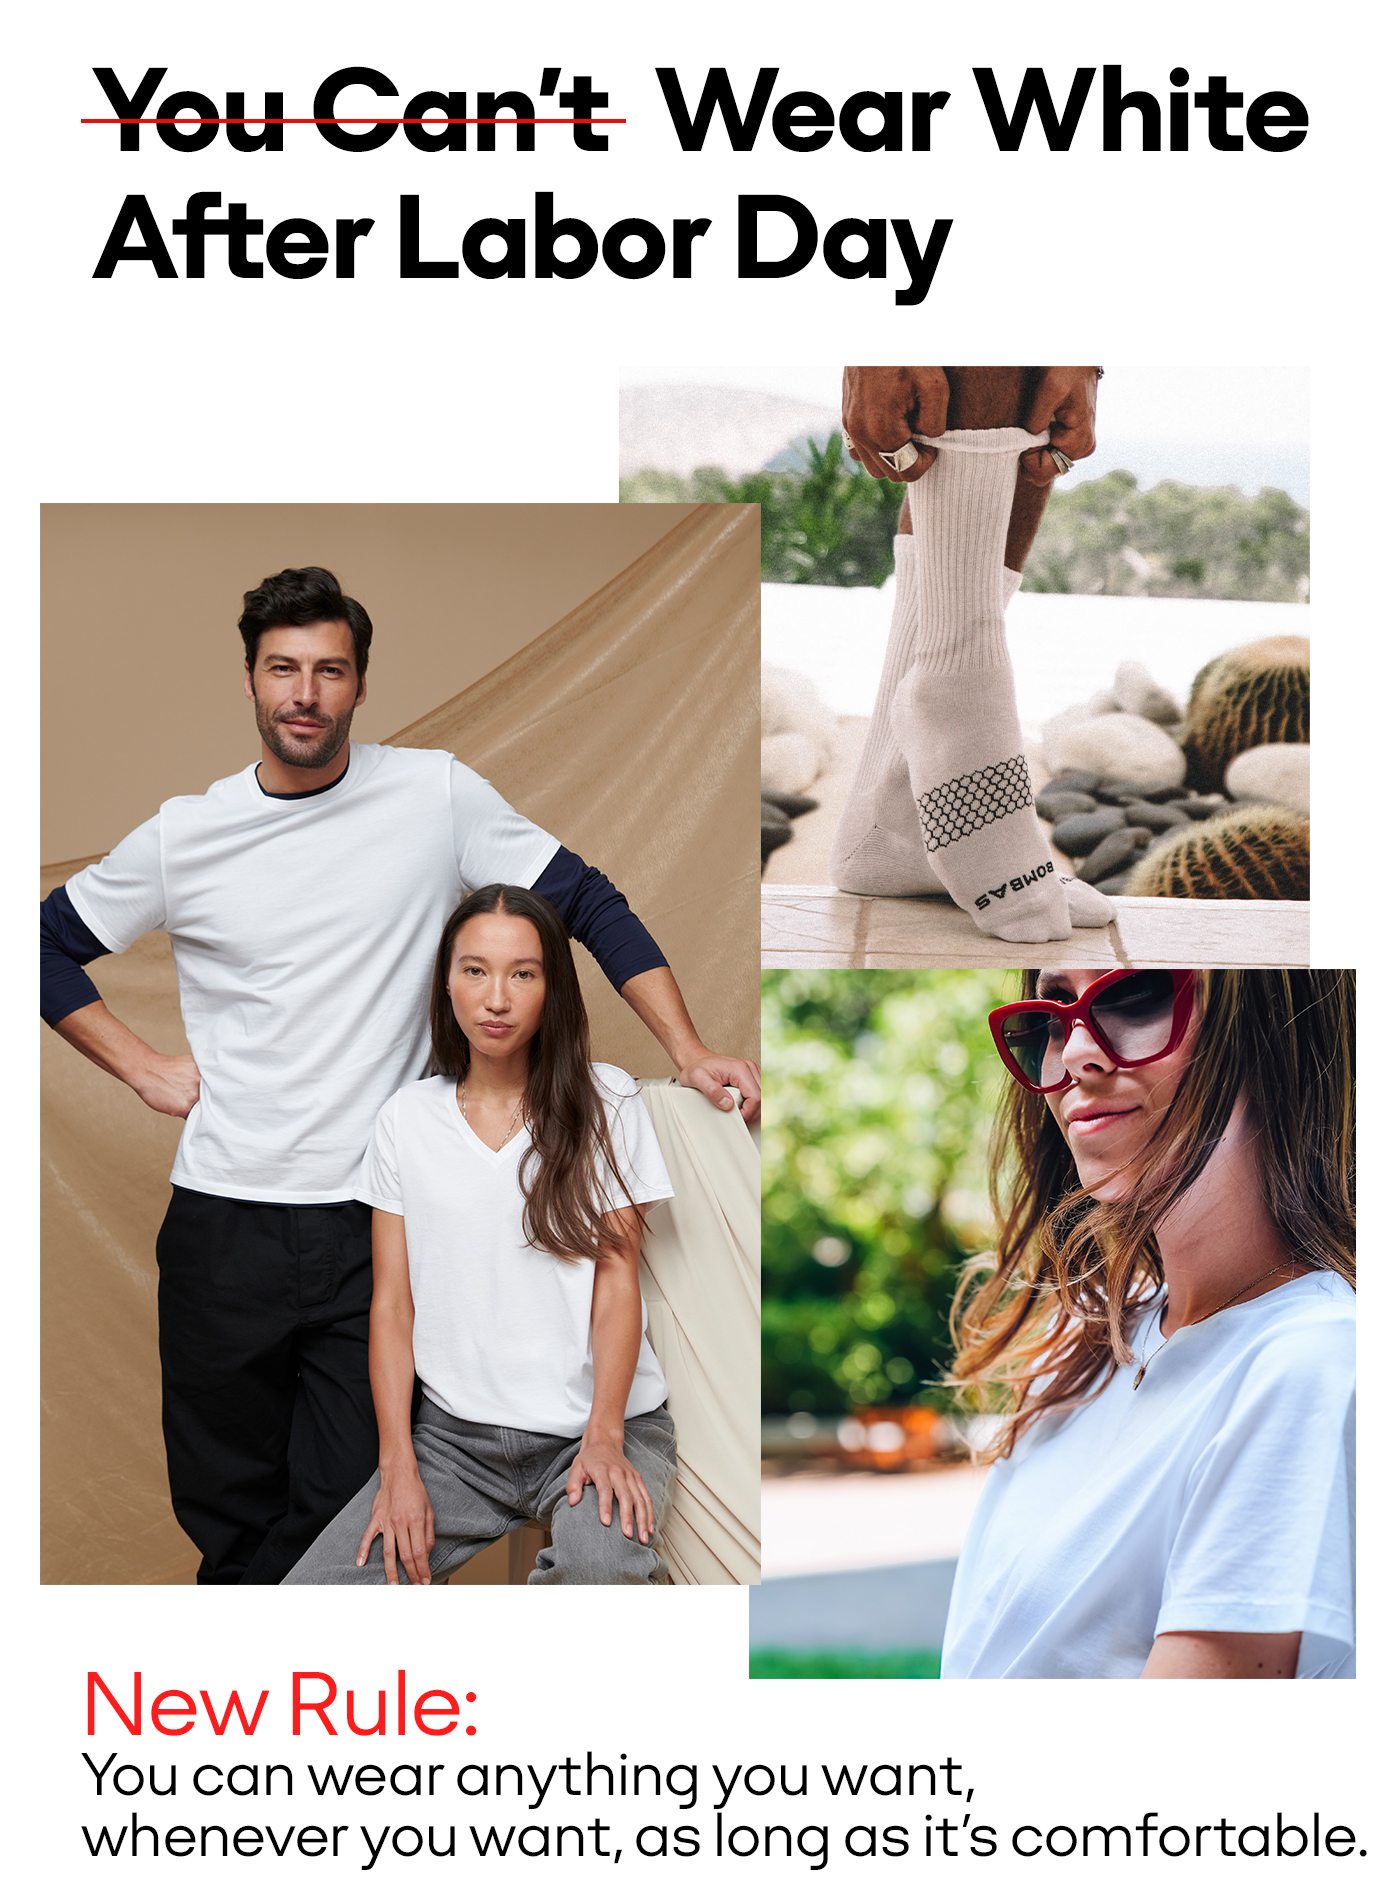 Wear White After Labor Day. New Rule: You can wear anything you want, whenever you want, as long as it's comfortable.